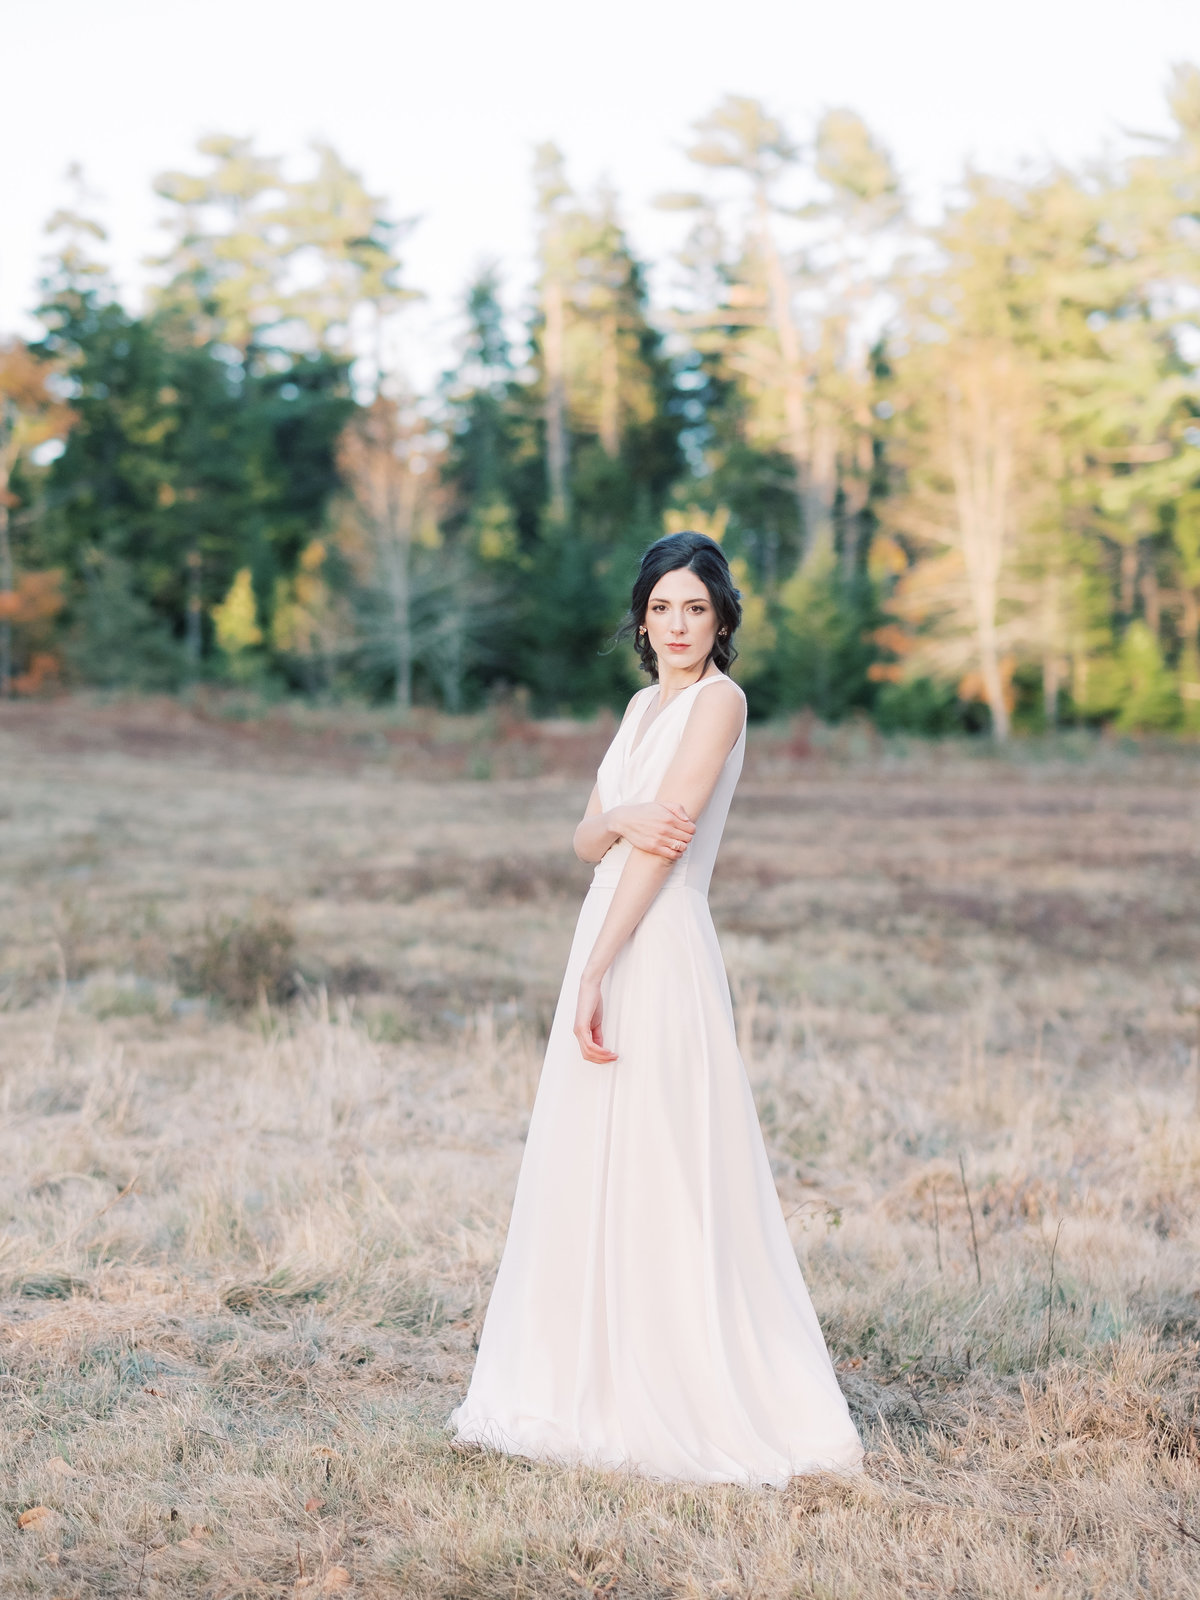 Jacqueline Anne Photography - Mount Uniacke Editorial-30